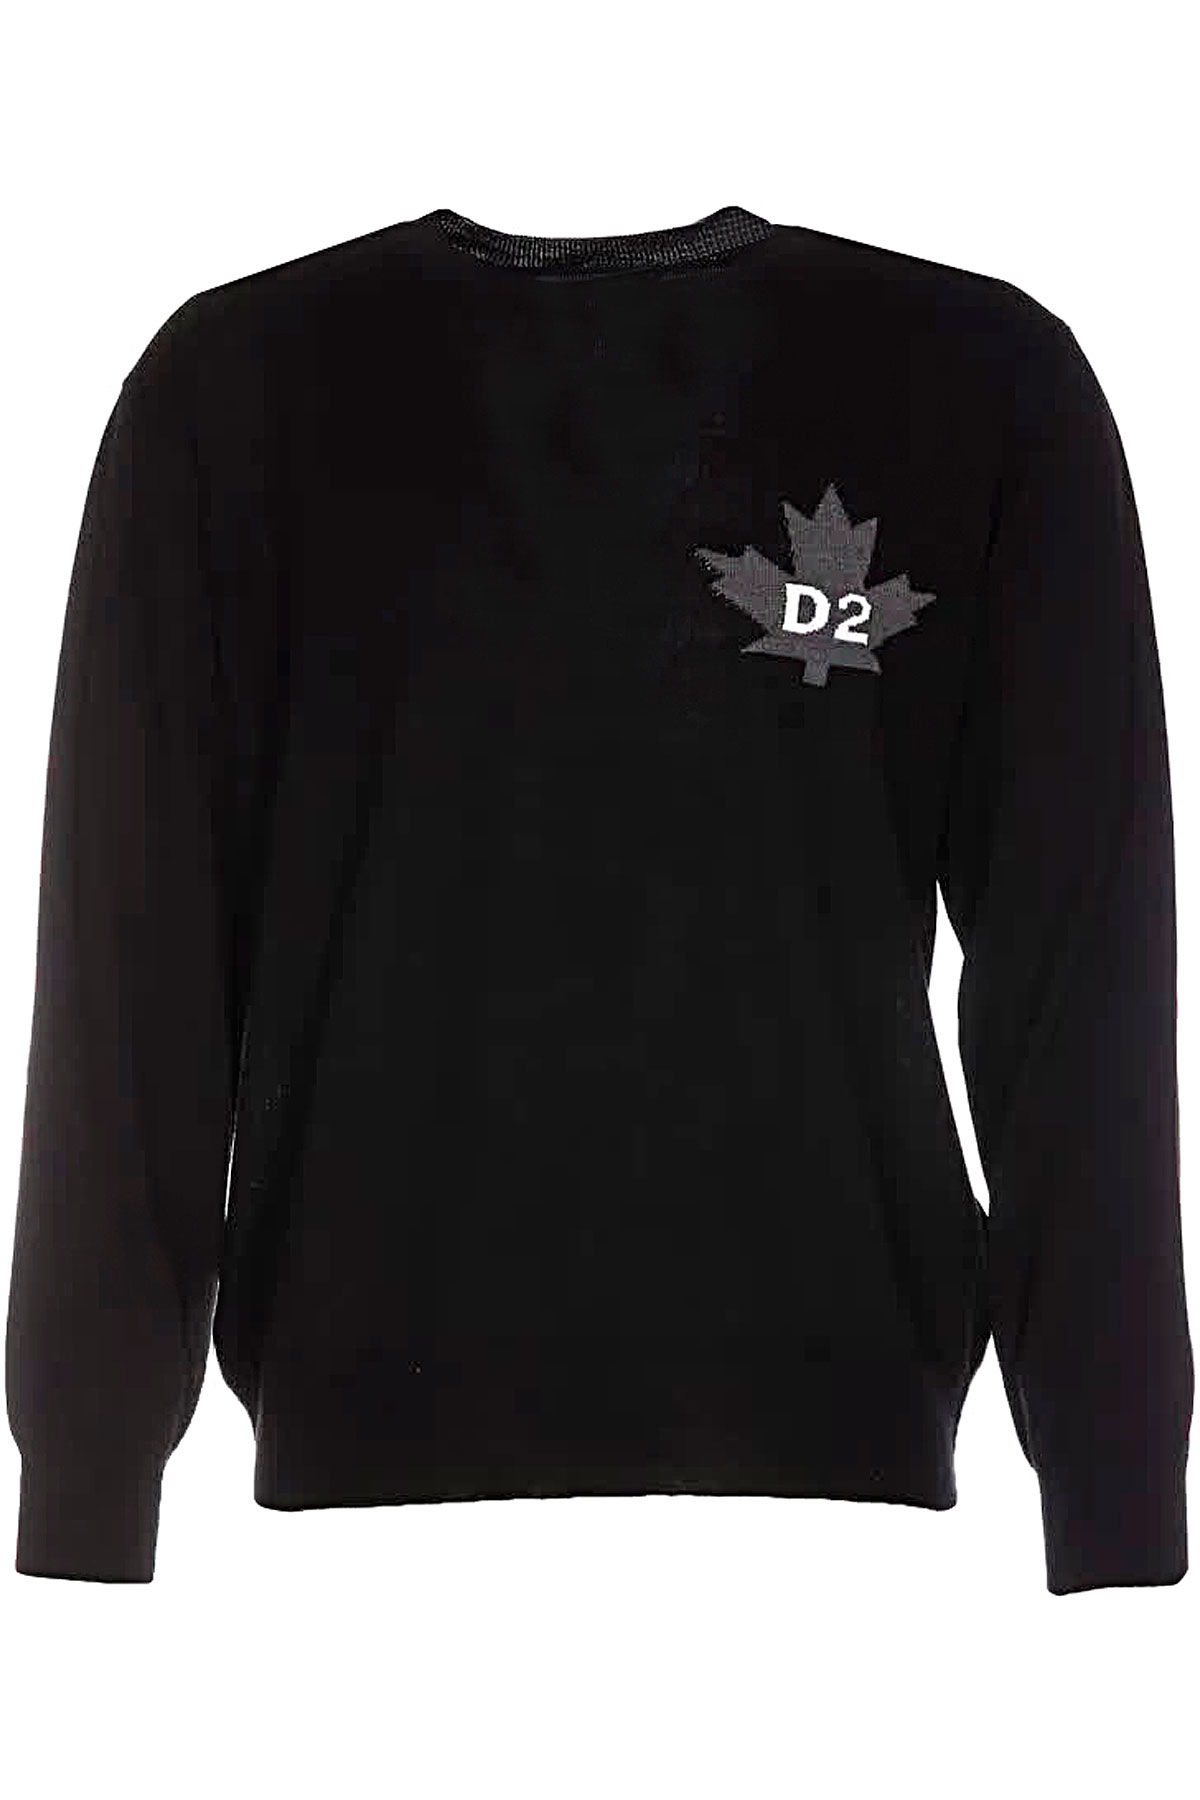 Mens Clothing Dsquared2, Style code: S74HA1371-S18332-961